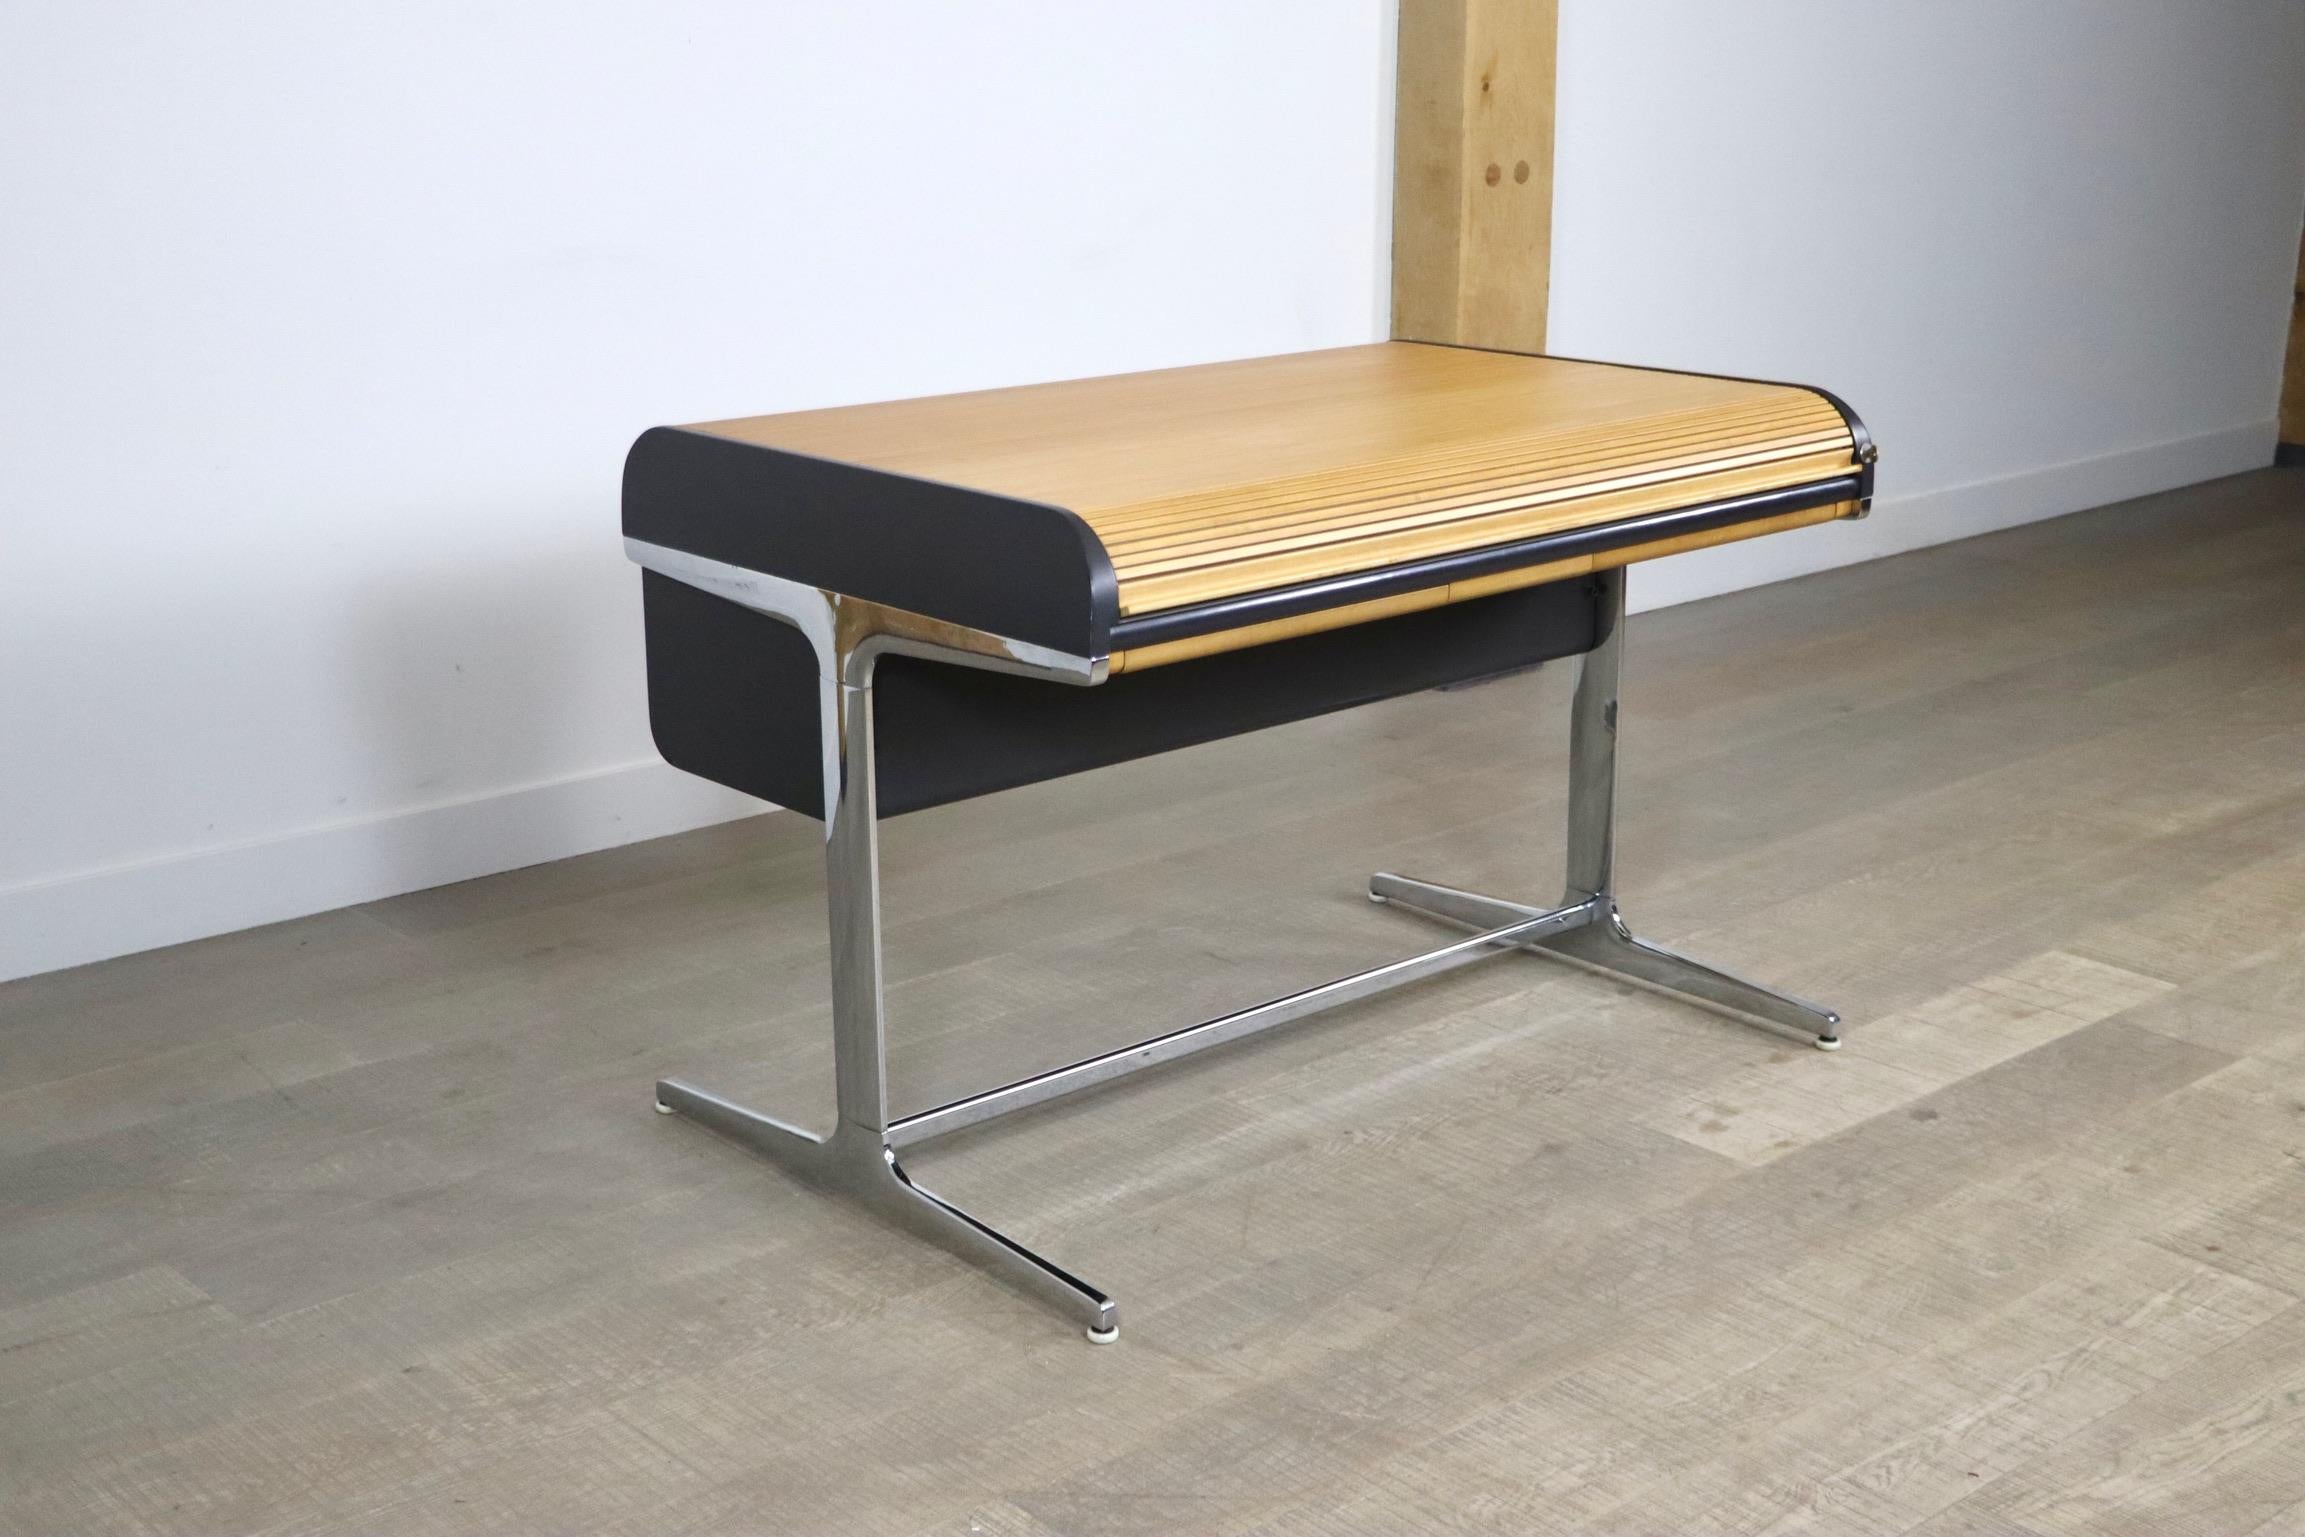 Chrome George Nelson and Robert Propst Action Office Roll-Top Desk for Herman Miller